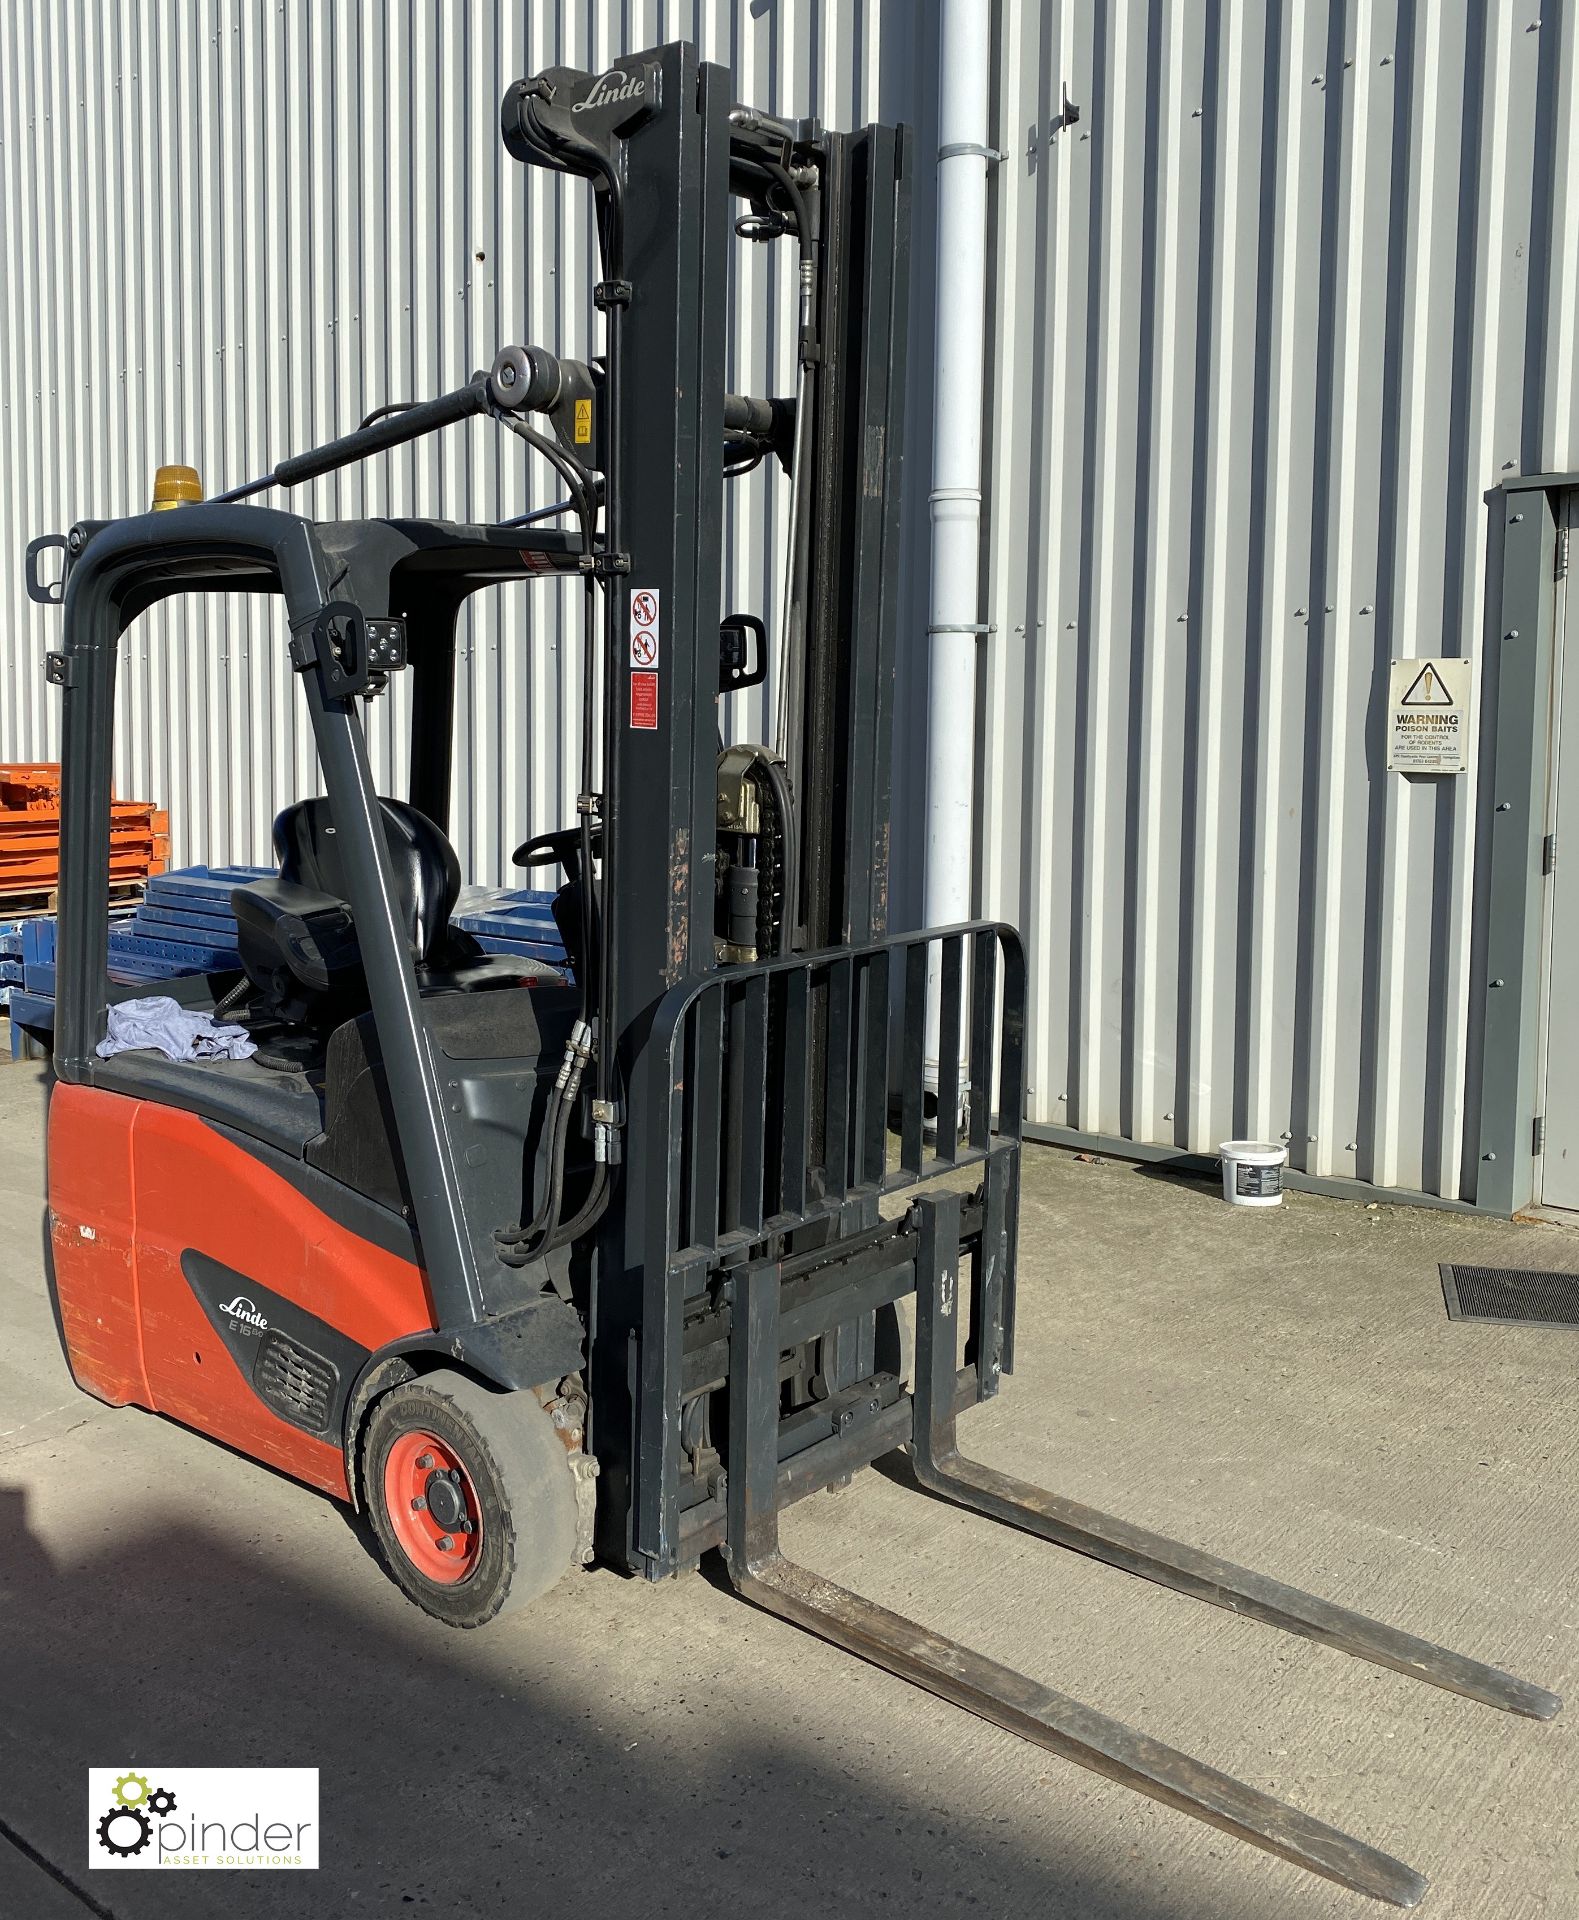 Linde E16 Evo 3-wheel electric Forklift Truck, 1600kg capacity, duplex clear view mast, closed